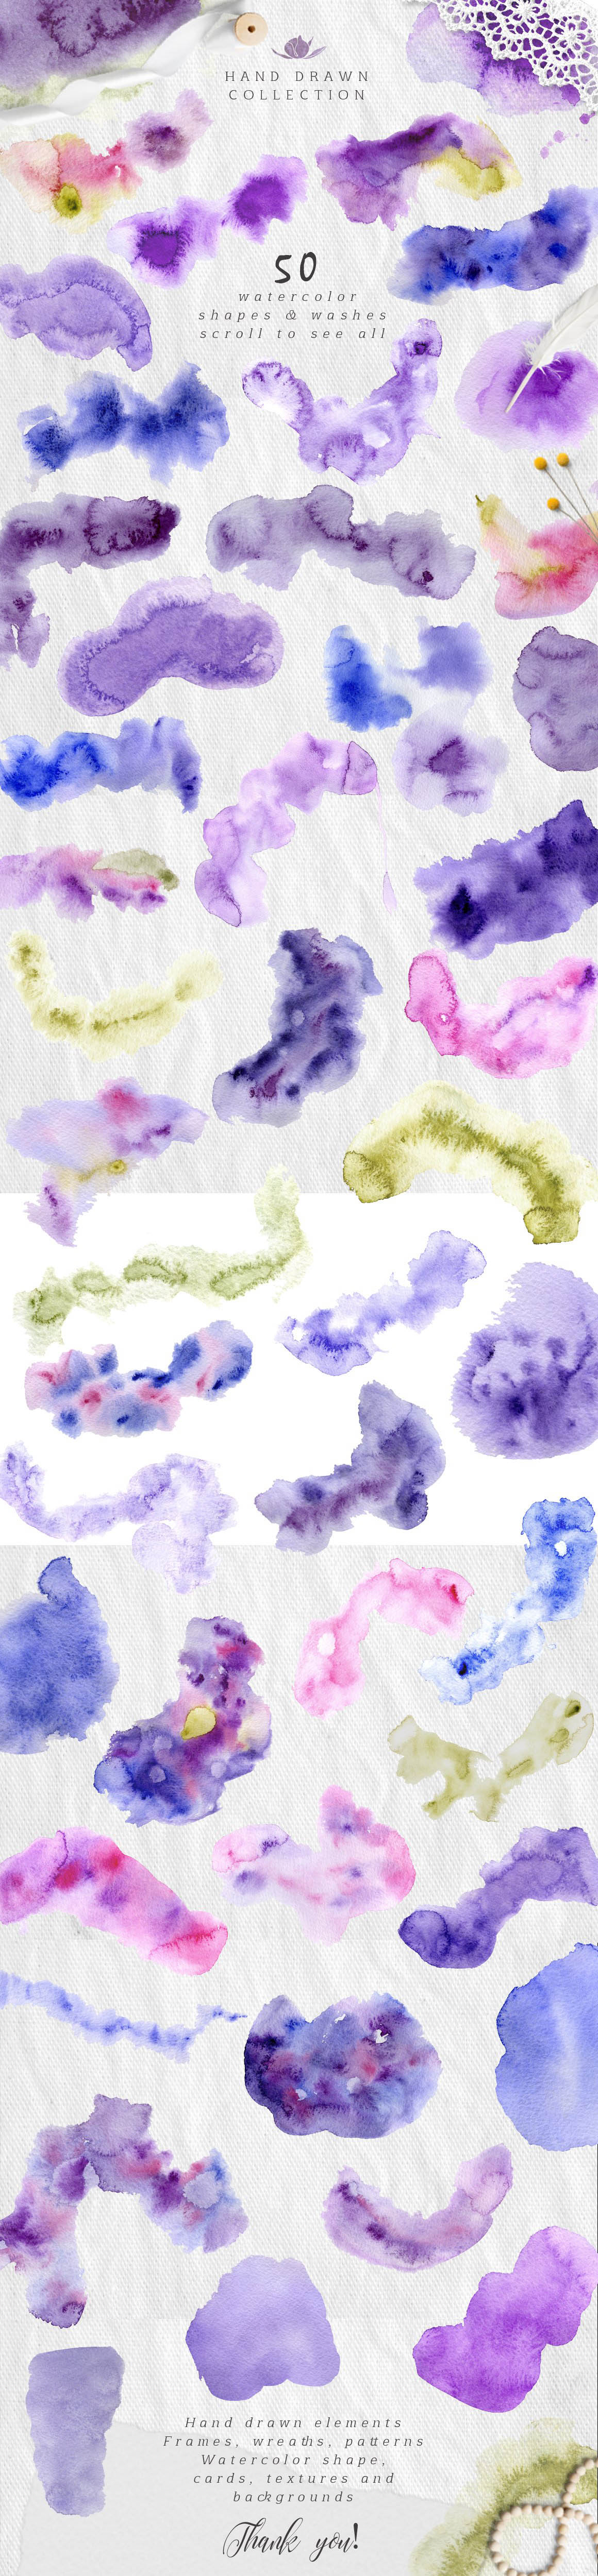 Ultra_Violet_watercolor_collection_06.jpg